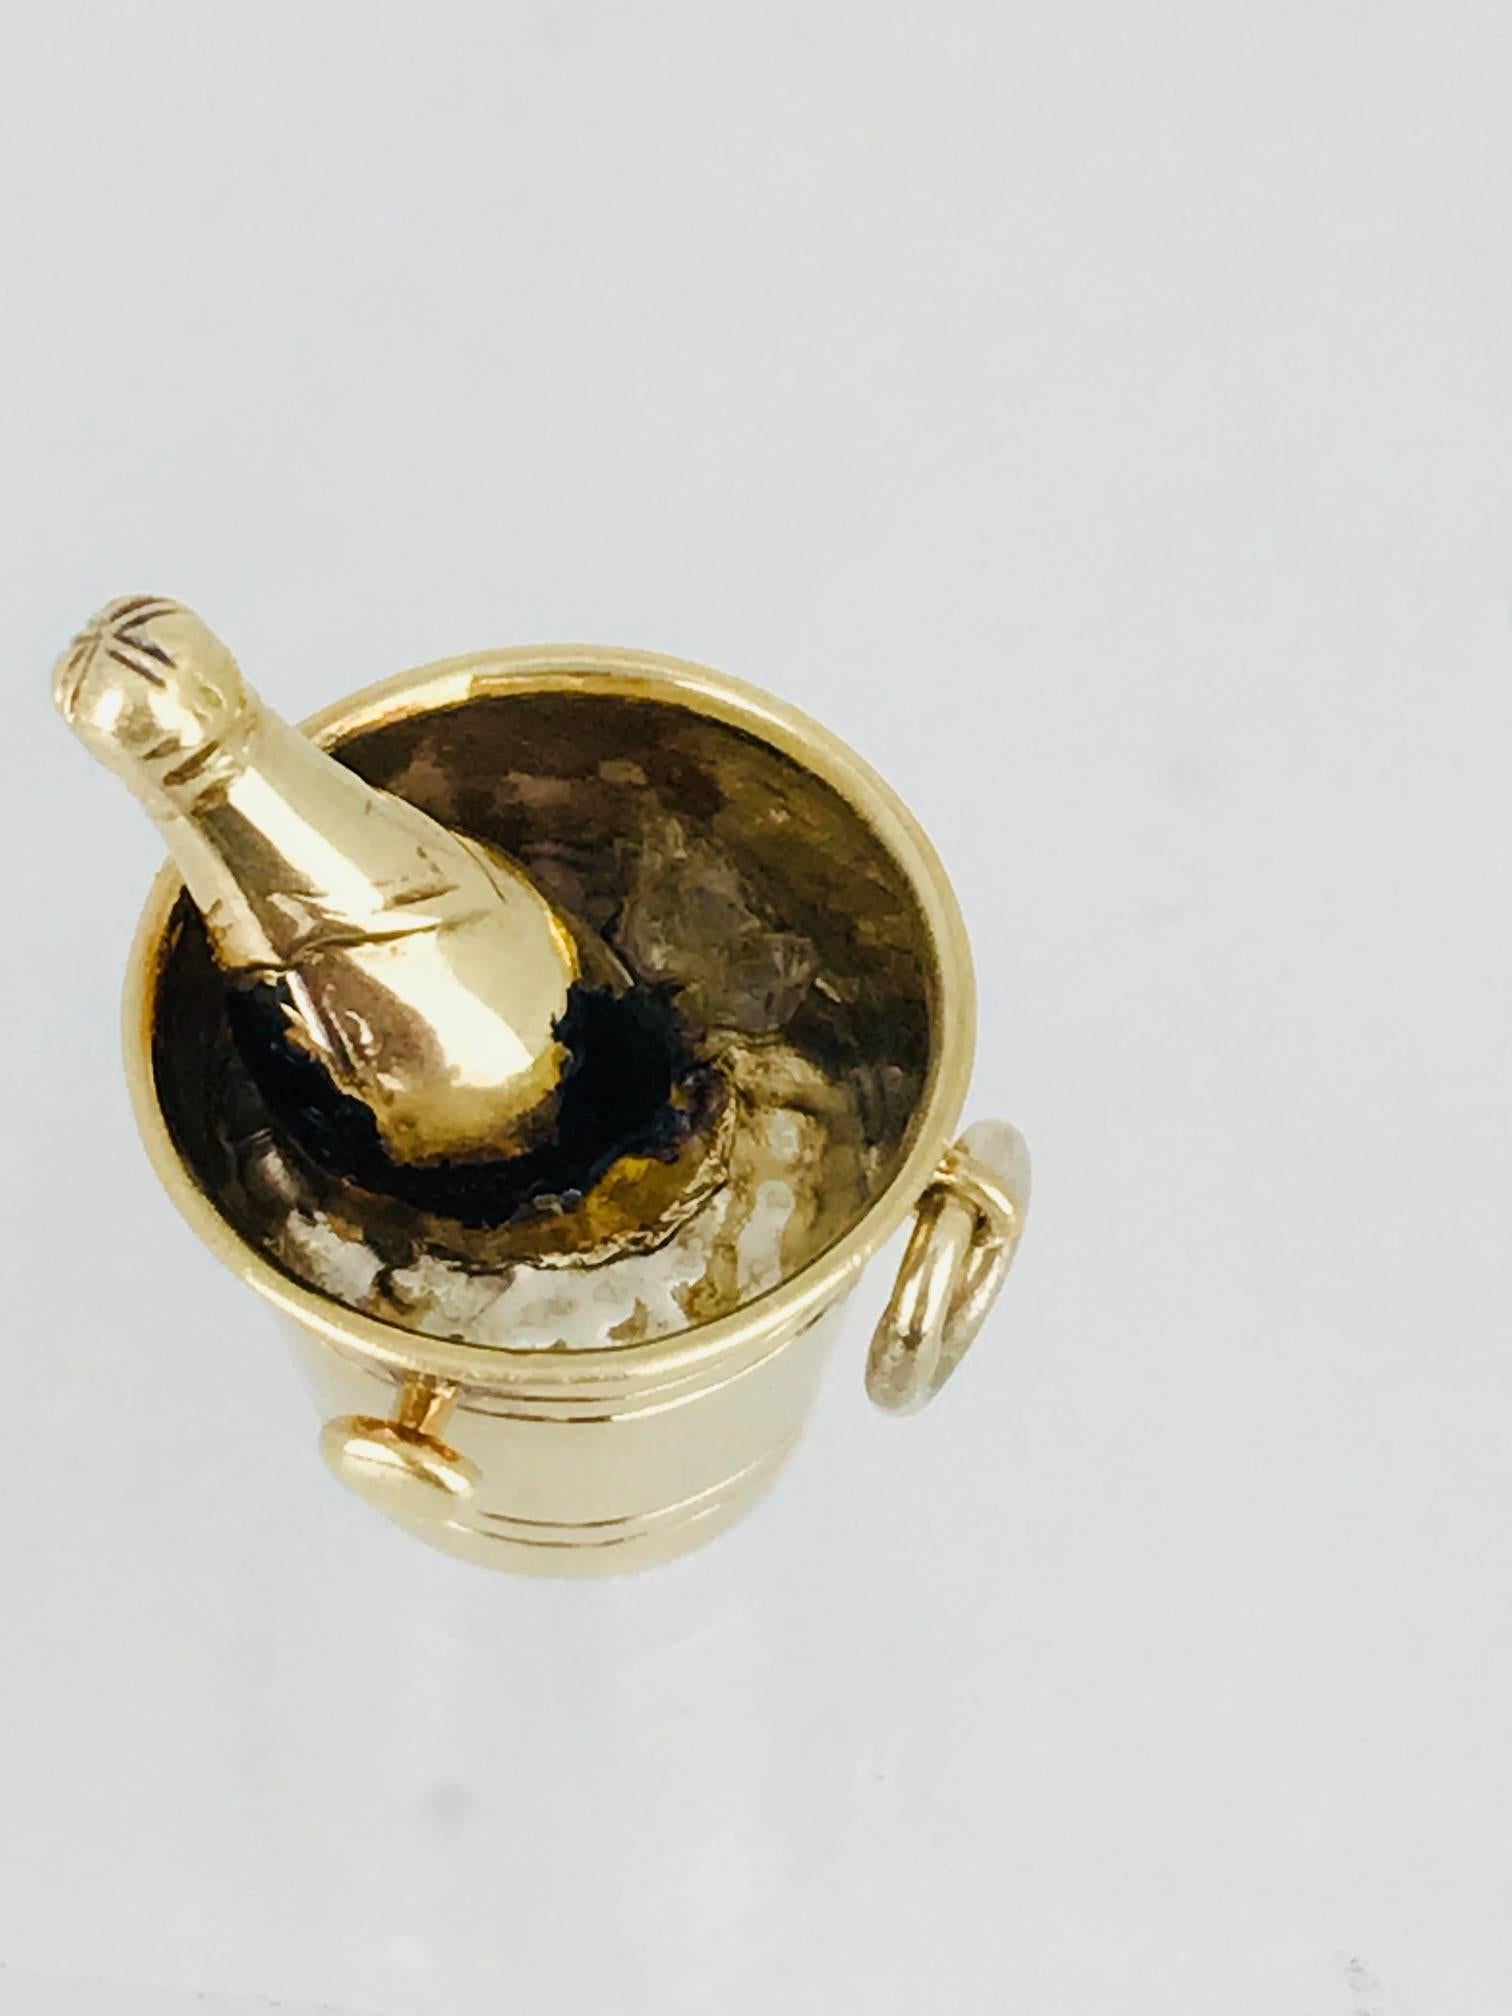 Modern Champagne on Ice, Bucket with Enamel, circa 1950, 14 Karat Gold For Sale